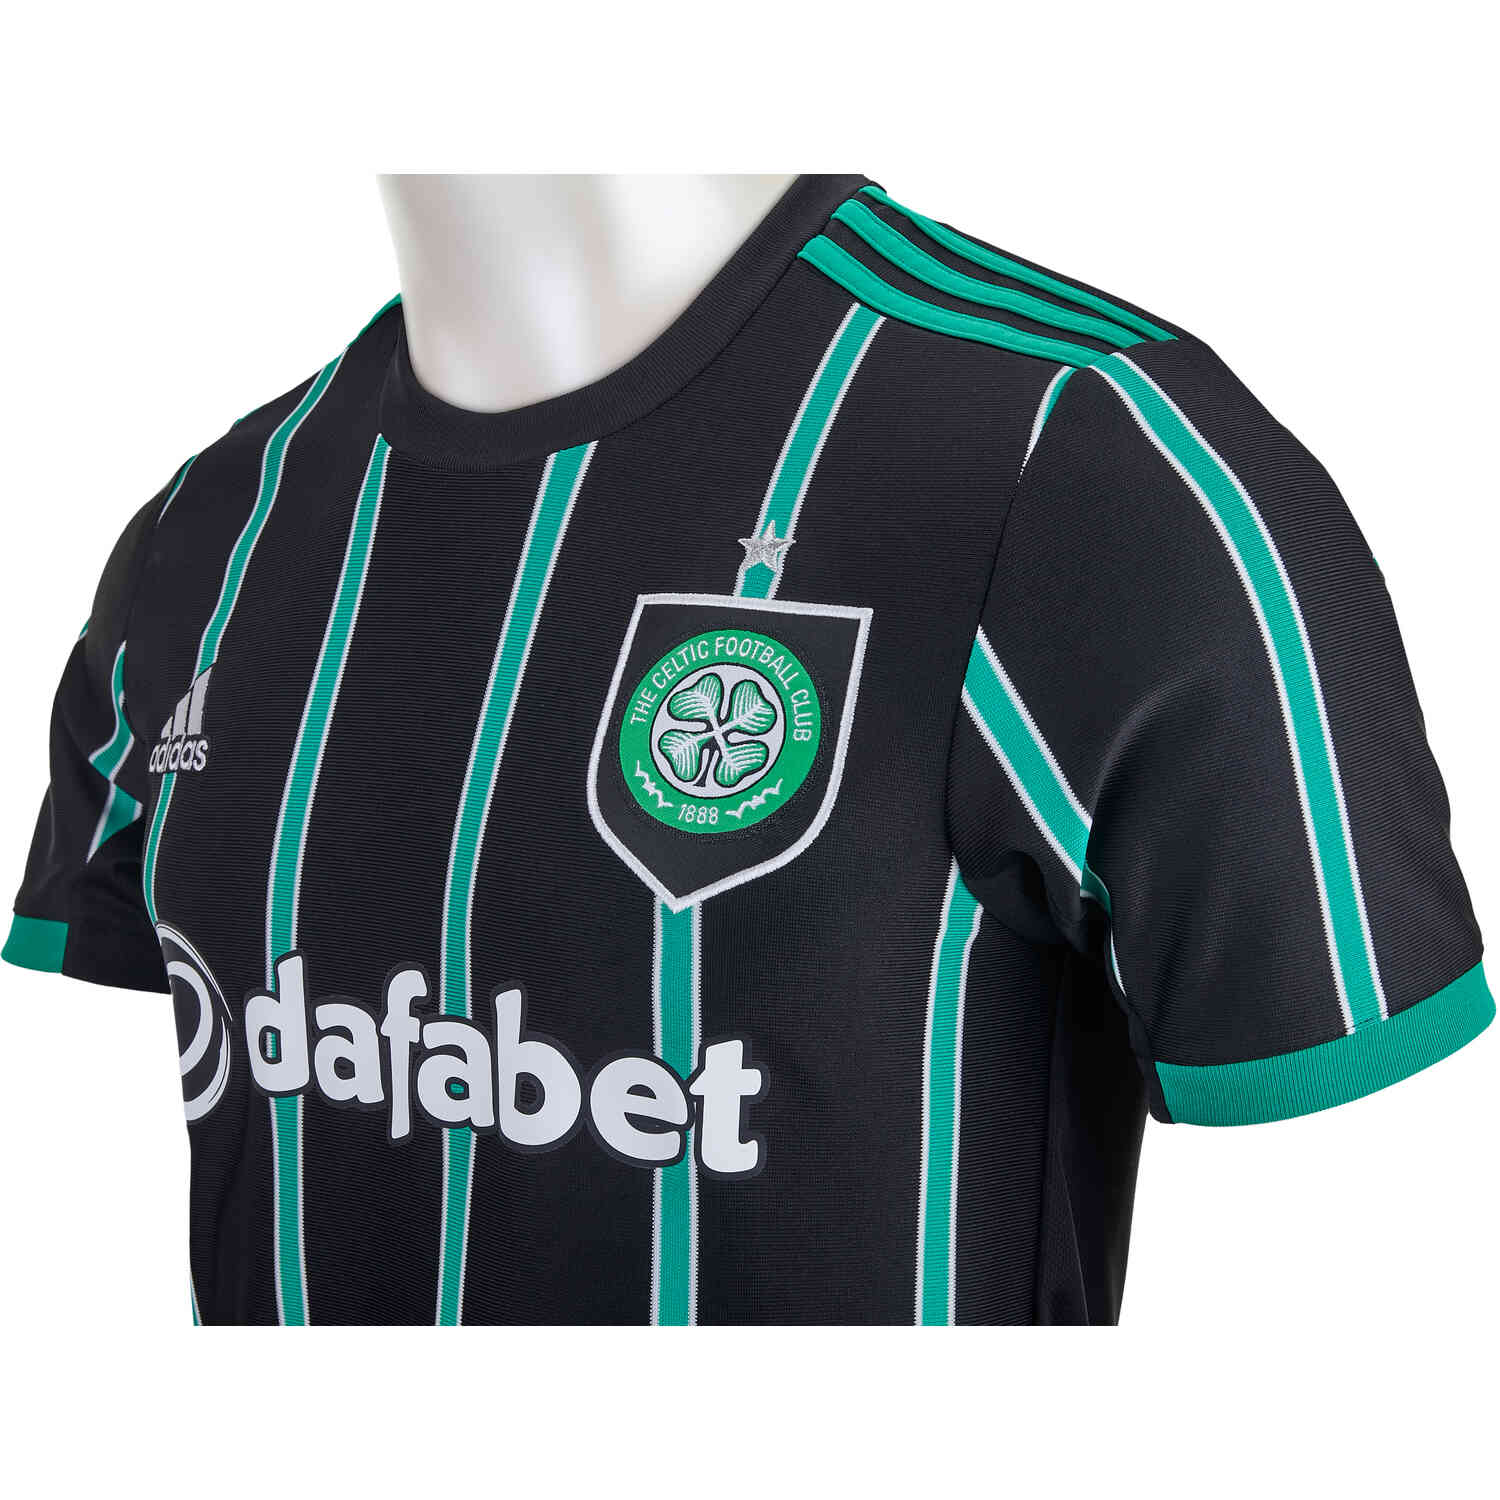 Celtic Reveal 22/23 Away Shirt From adidas - SoccerBible